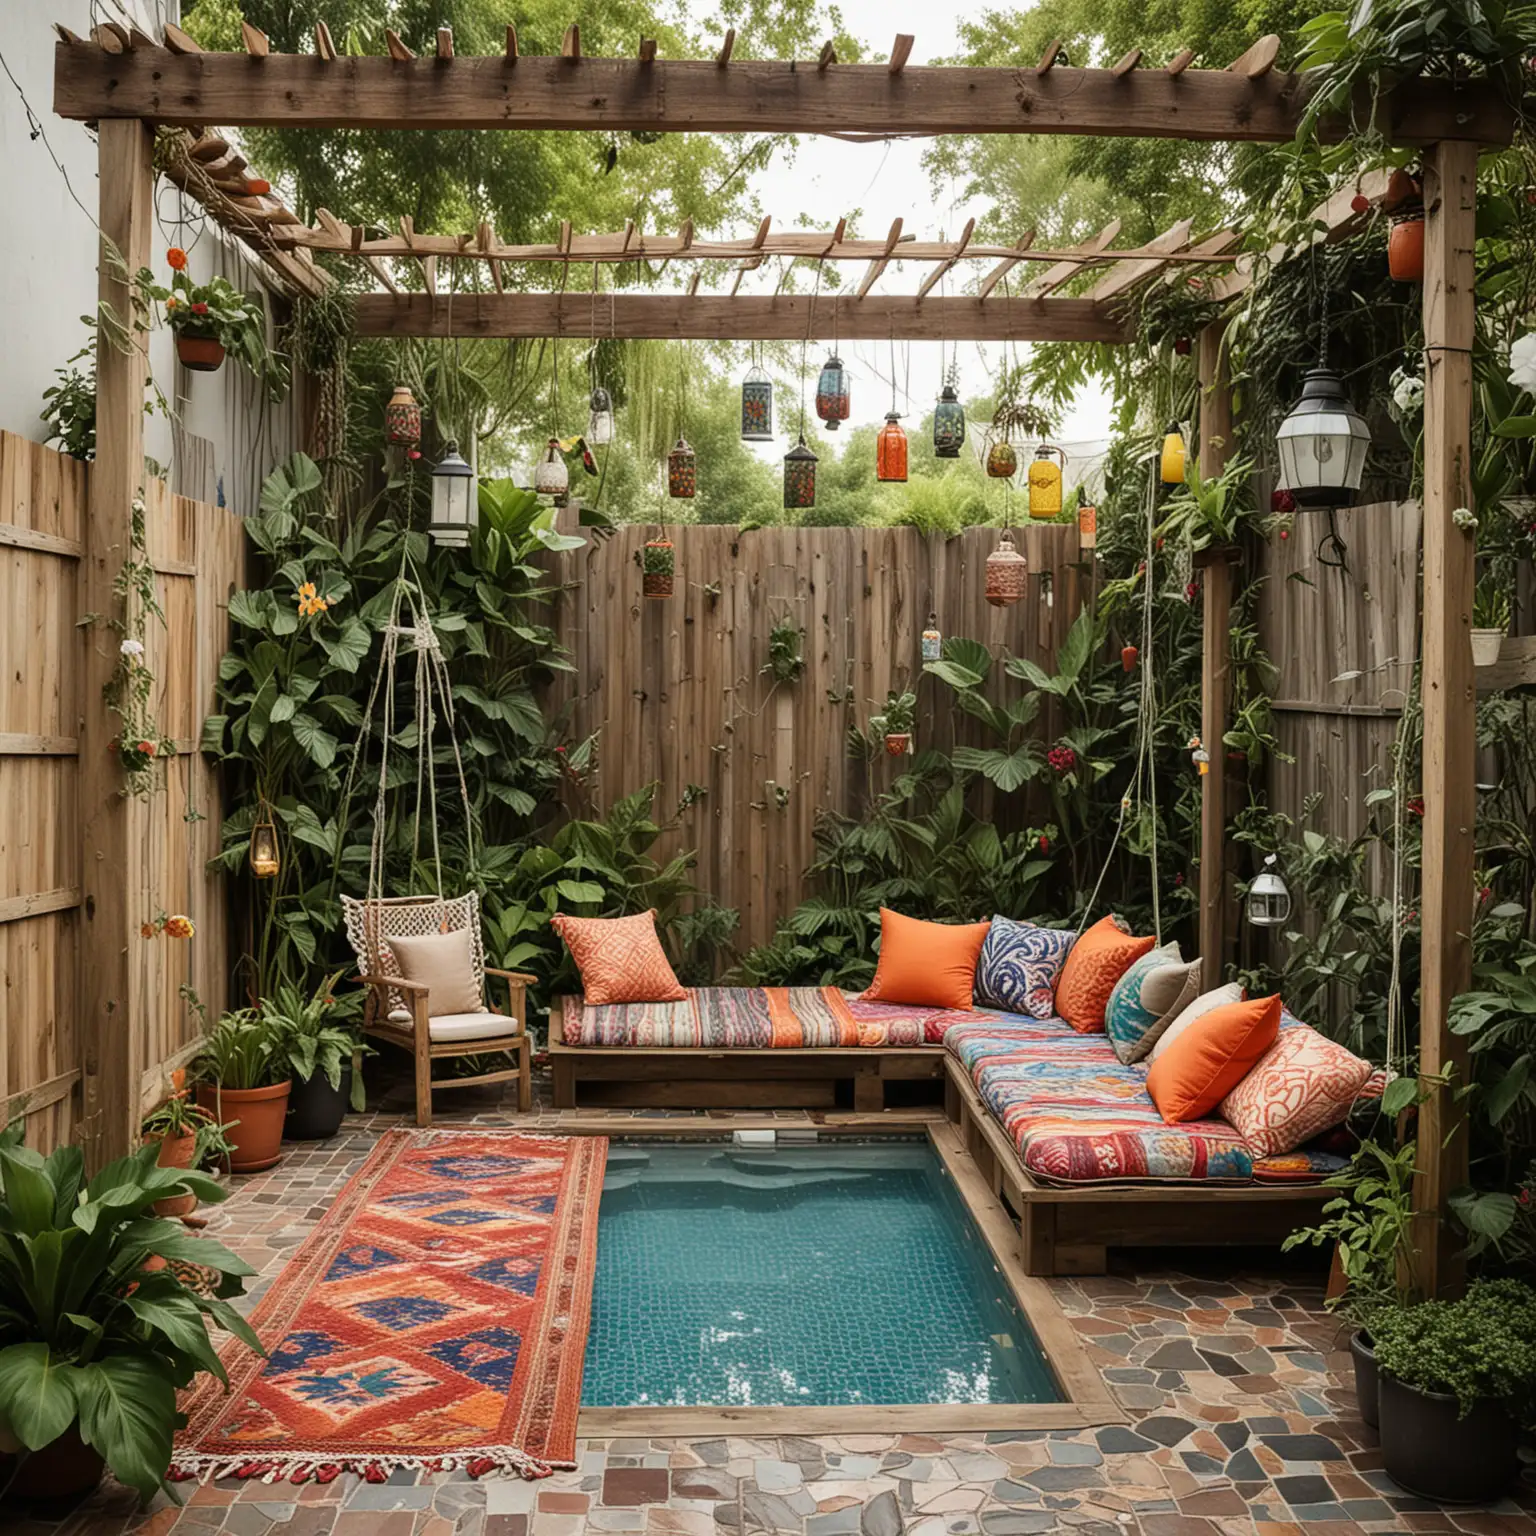 a wide shot of A small urban backyard with a reclaimed wood deck adorned with colorful outdoor rugs and a mix of poufs, floor cushions, and hanging macramé chairs. Surround the space with tall, leafy plants like banana leaves, bird of paradise, and trailing ivy. A small, rectangular above-ground pool with a mosaic tile finish and an attached wooden ladder offers easy access. Add a hammock strung between two sturdy posts, and a pergola with hanging plants, vintage lanterns, and string lights for a relaxed, eclectic vibe.